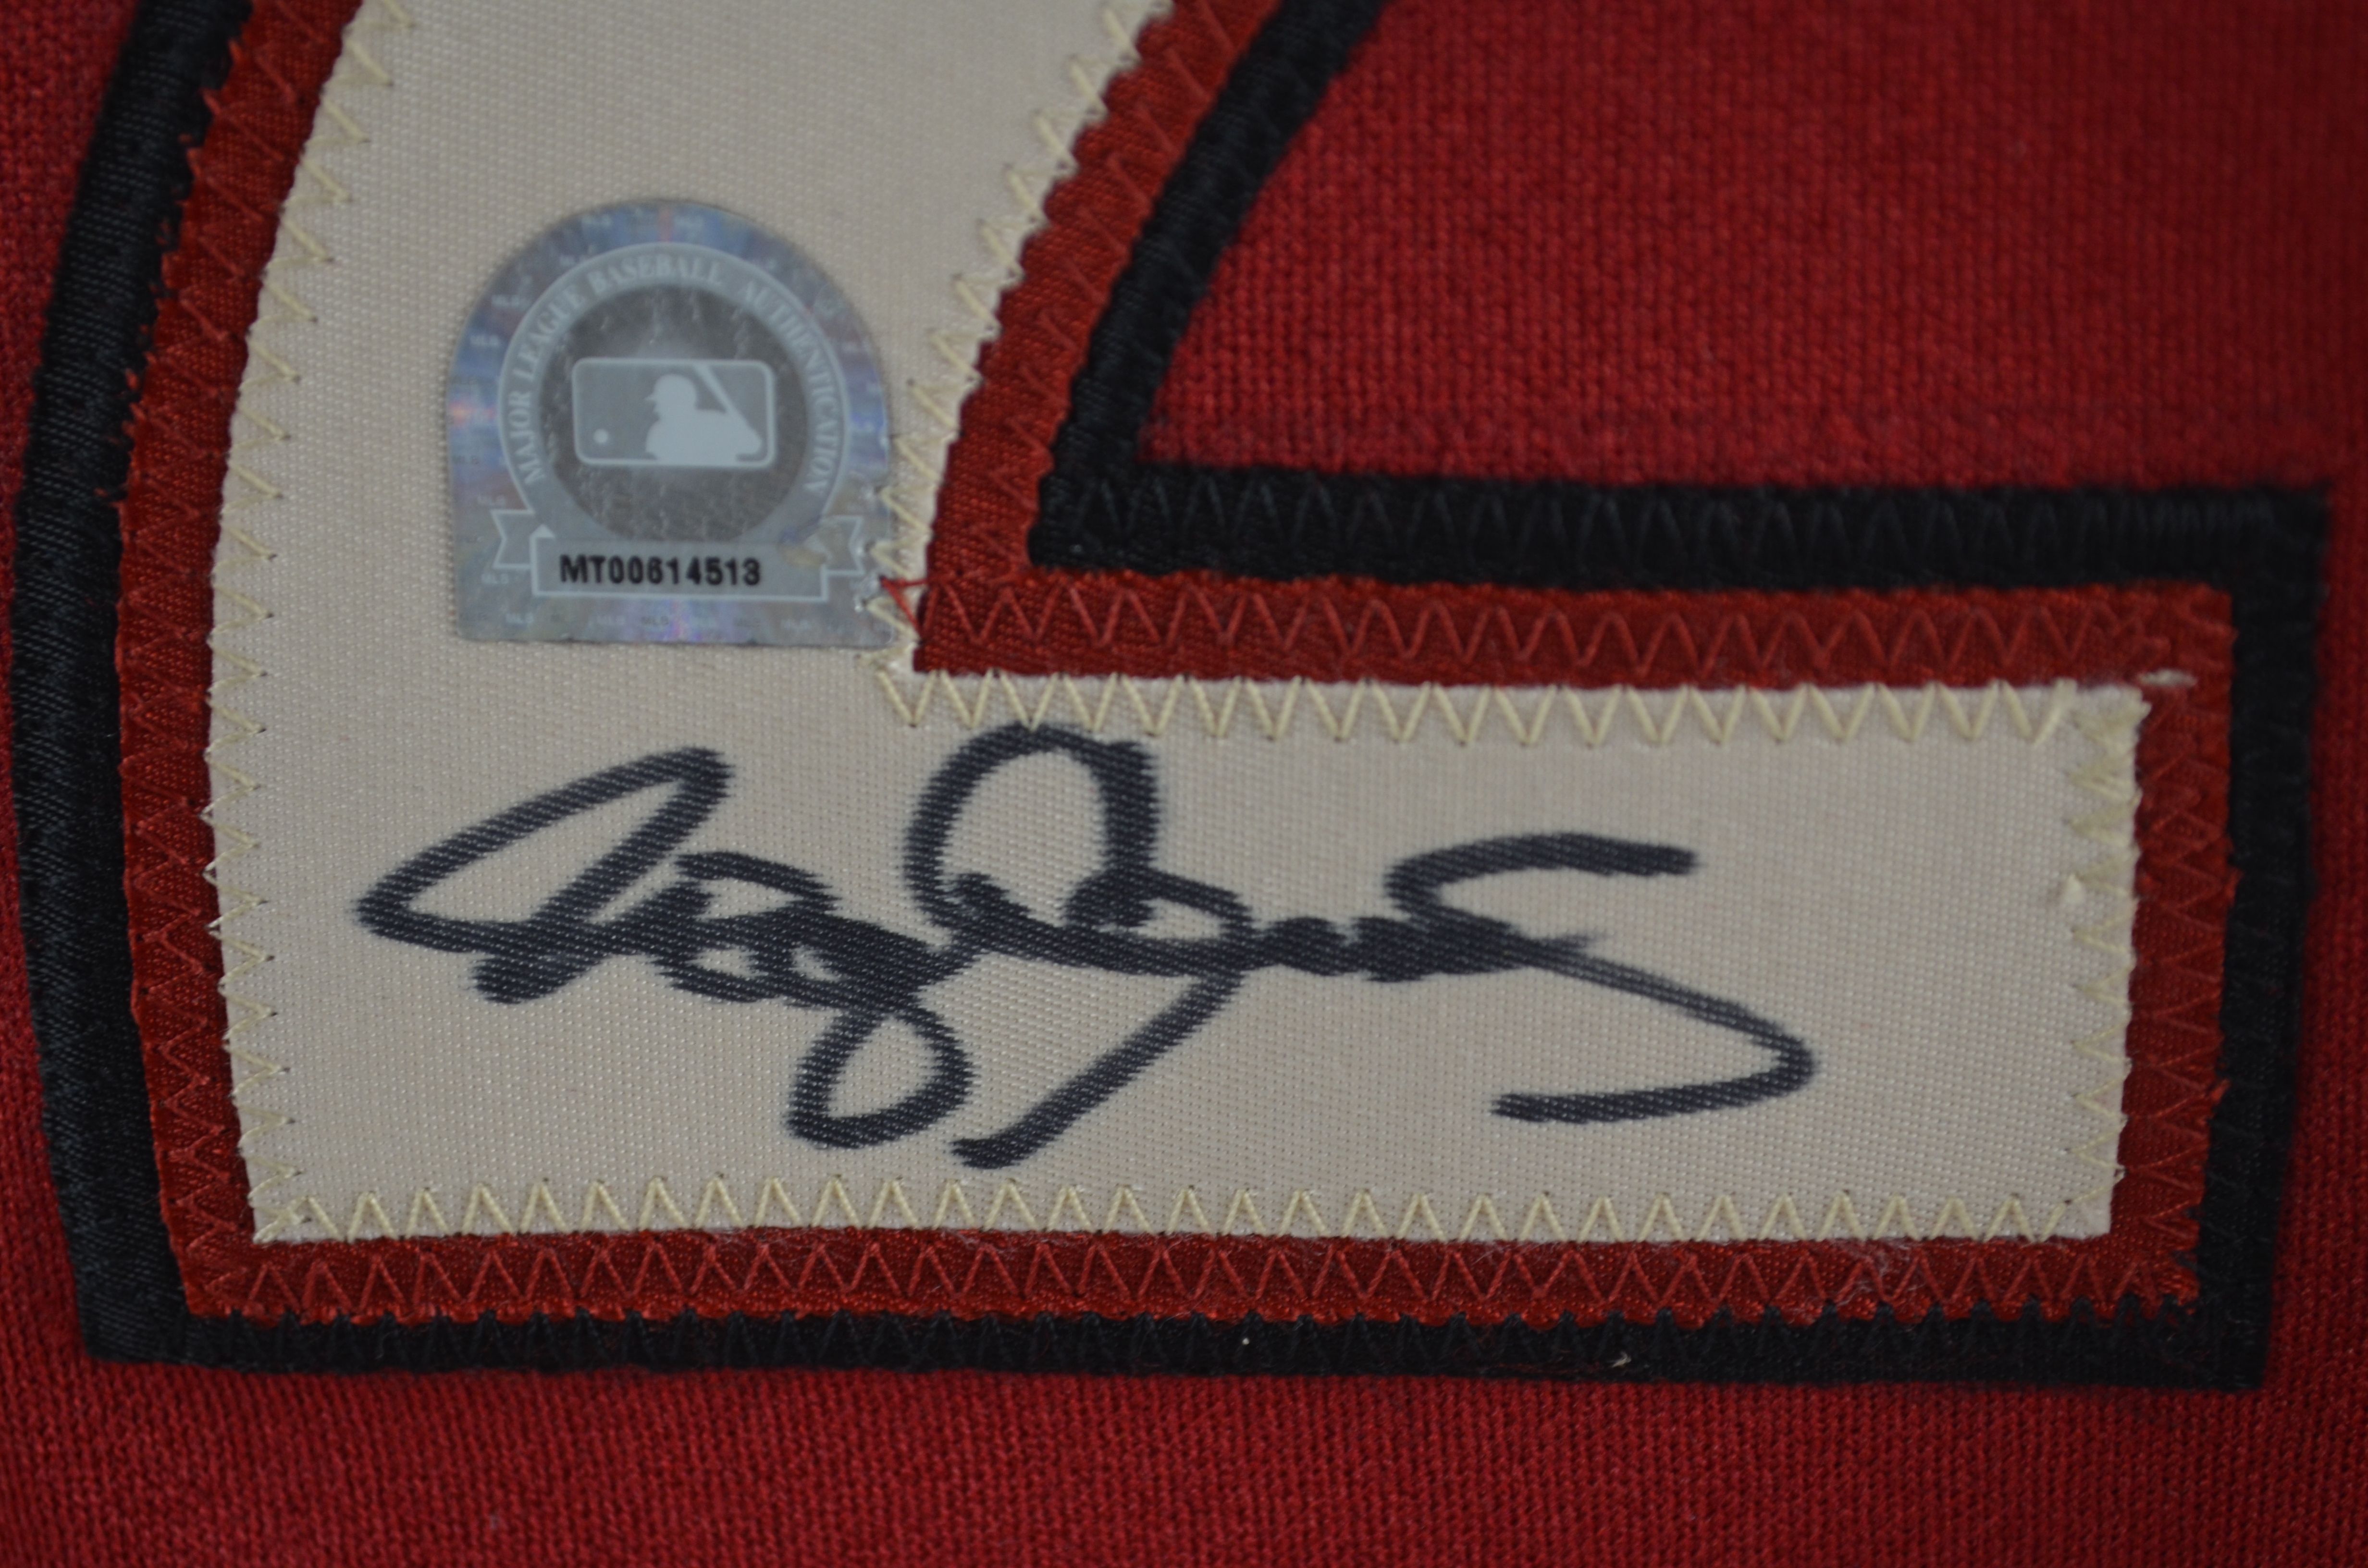 Tristar Roger Clemens Autographed Houston Astros Brick Jersey with 2005 World Series Patch